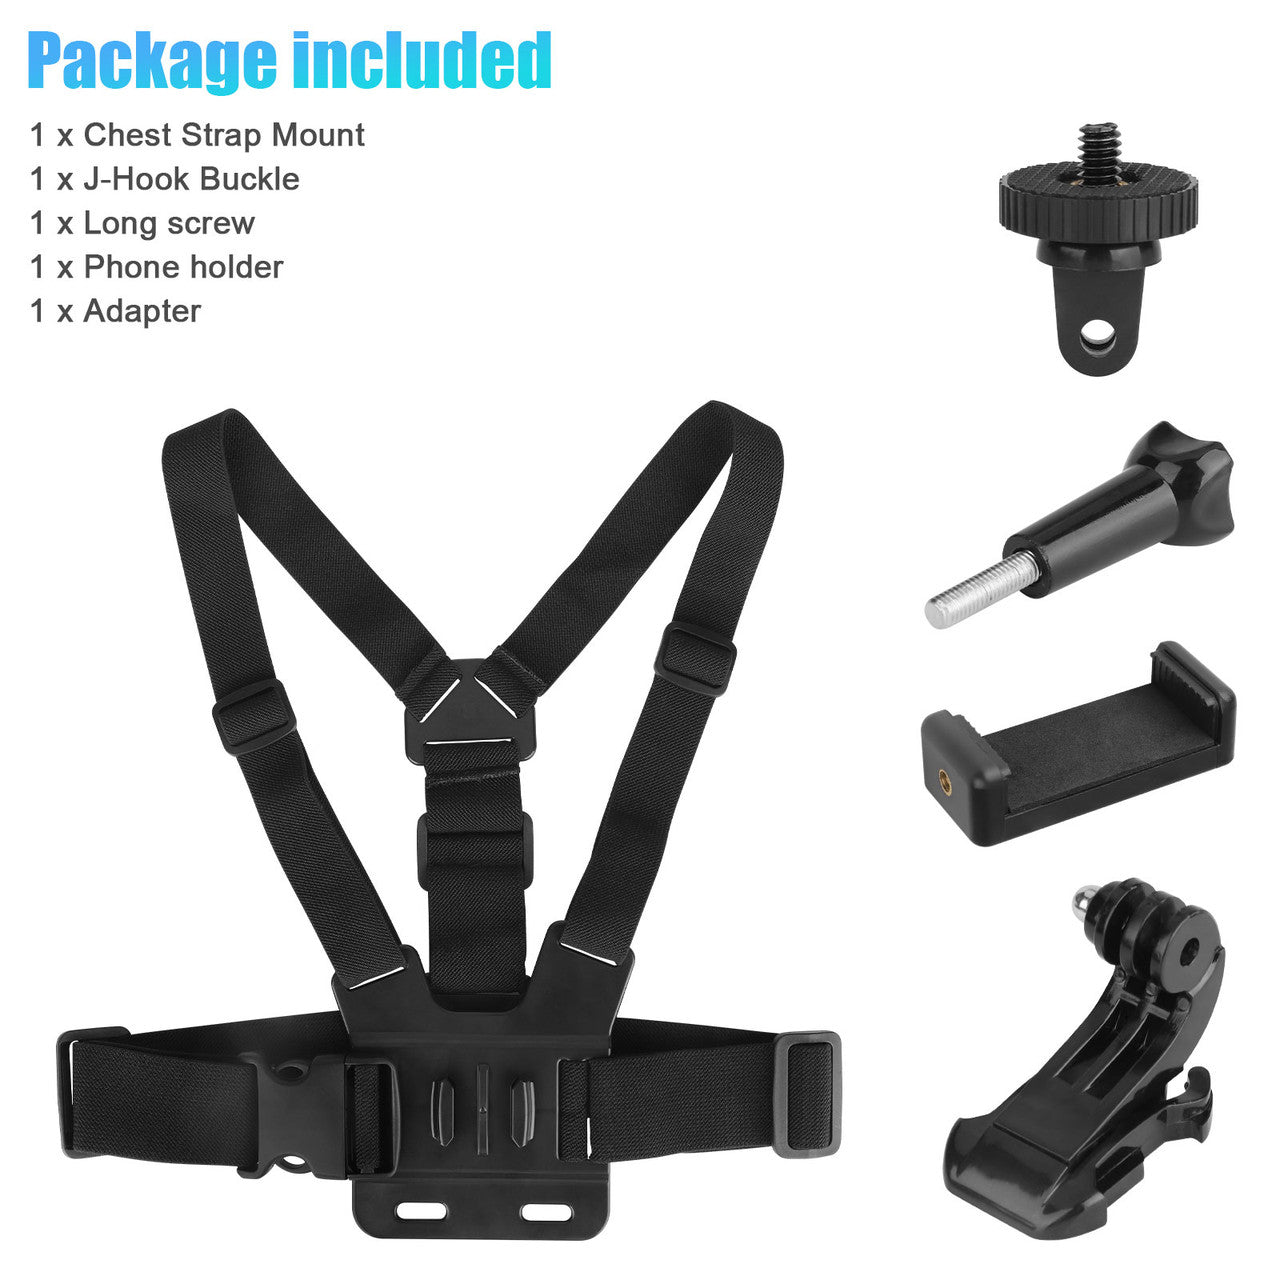 CN-26 Mobile Phone Chest Strap Mount for Travel, Secure and Stable